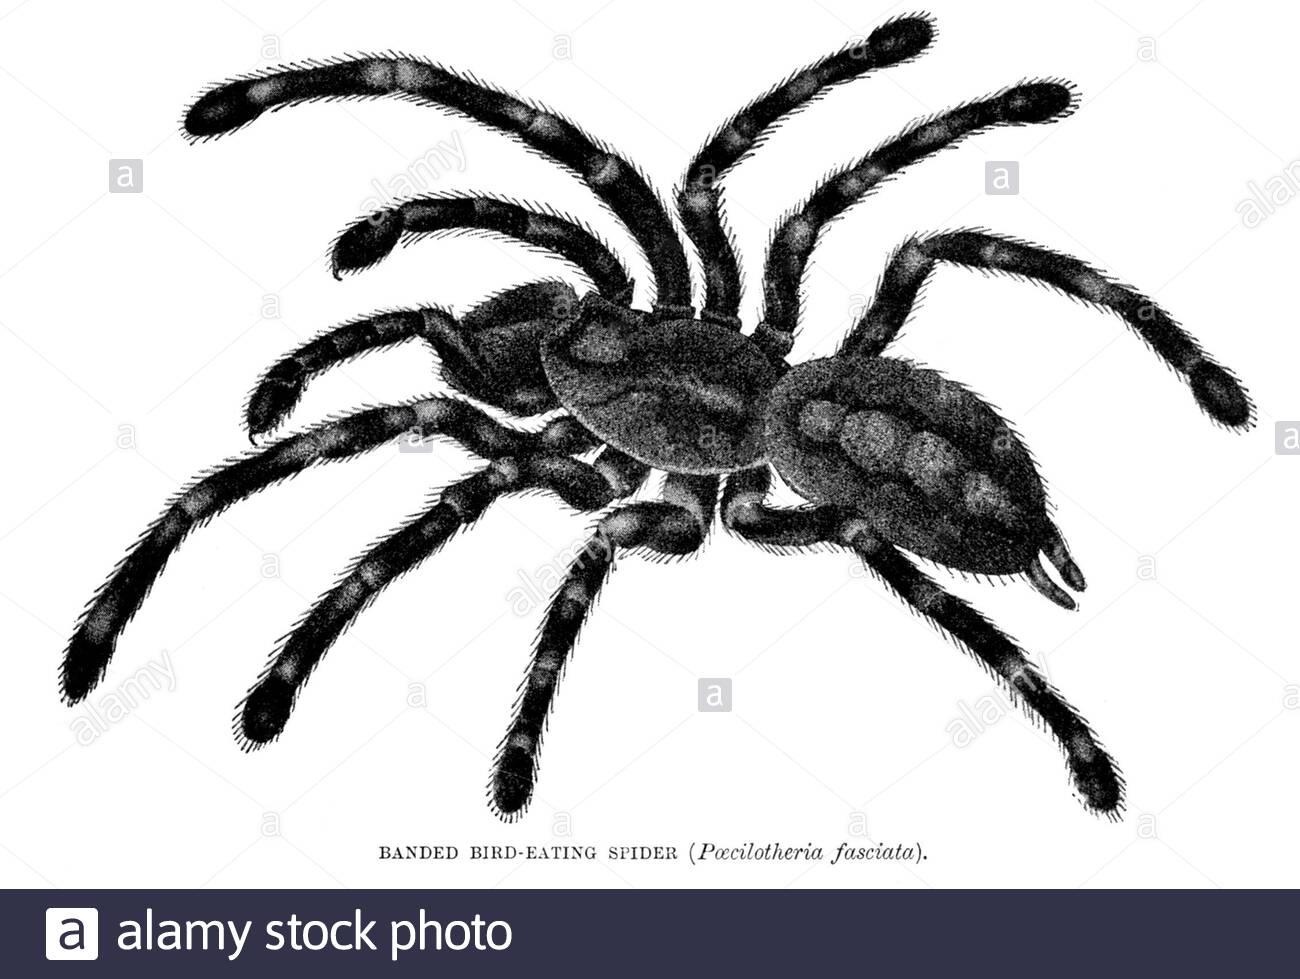 Banded Bird Eating Spider, vintage illustration from 1896 Stock Photo